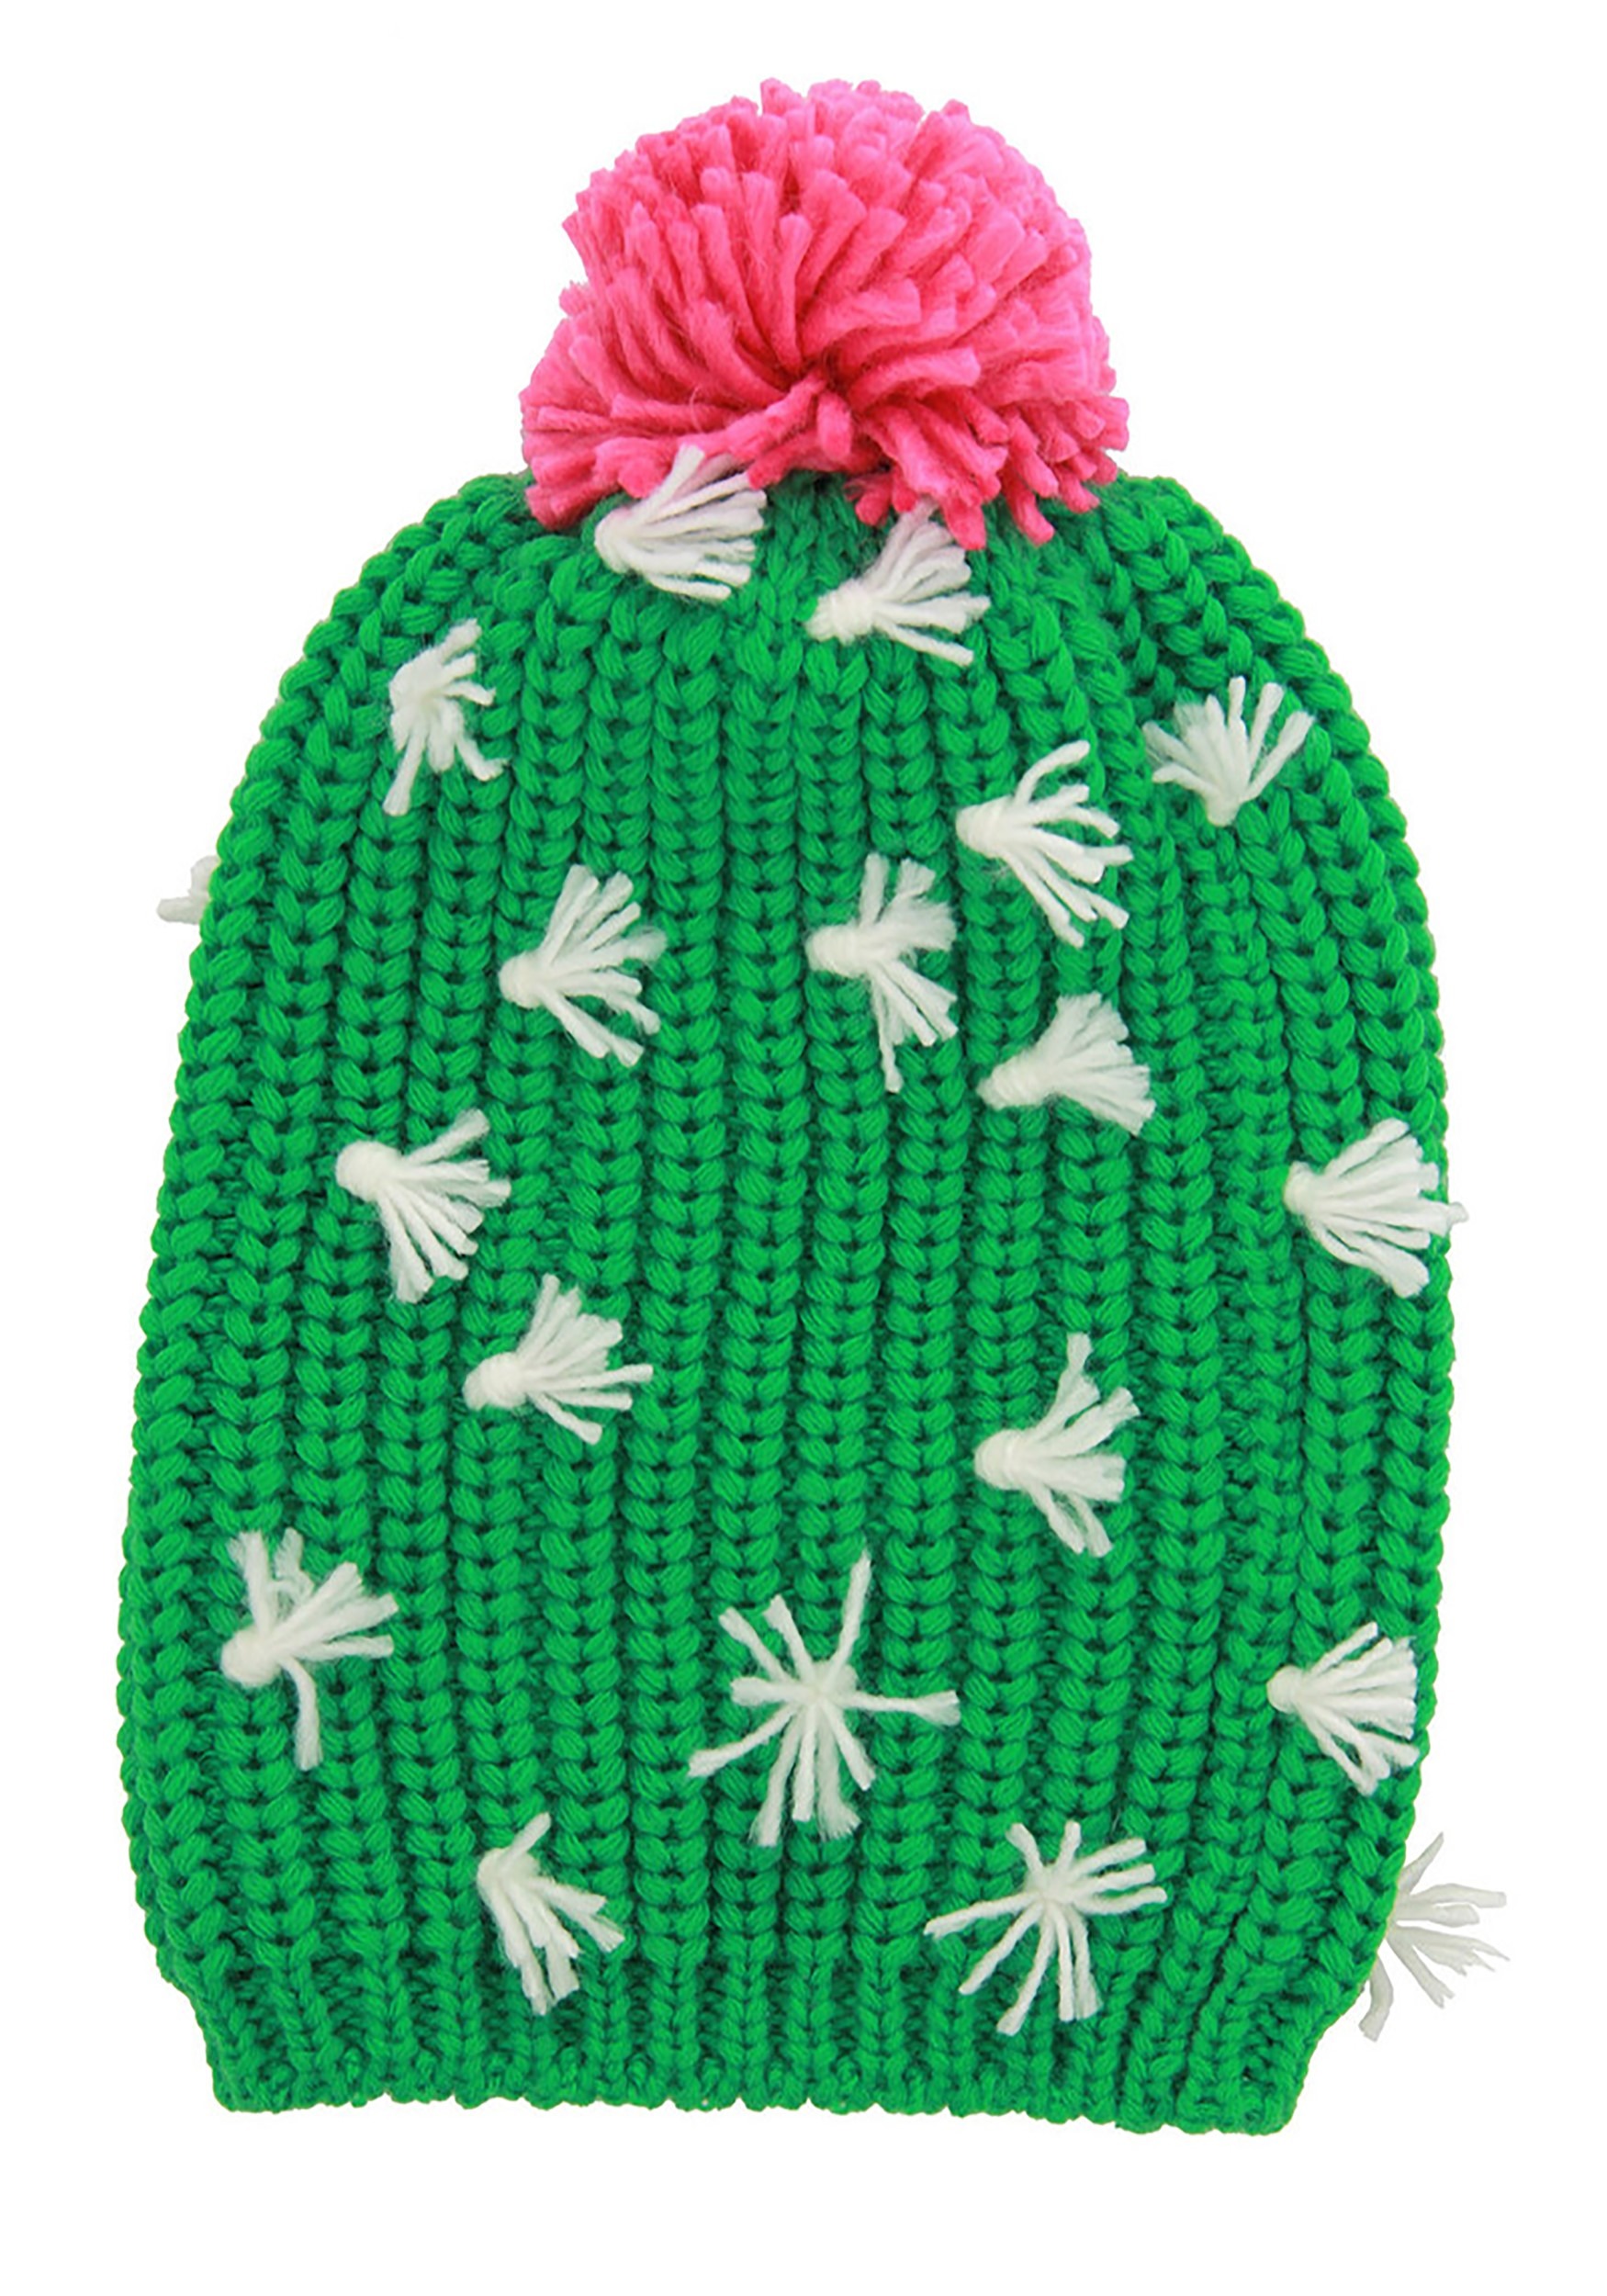 Adult Knit Cactus Slouch Beanie , Knitted Hat